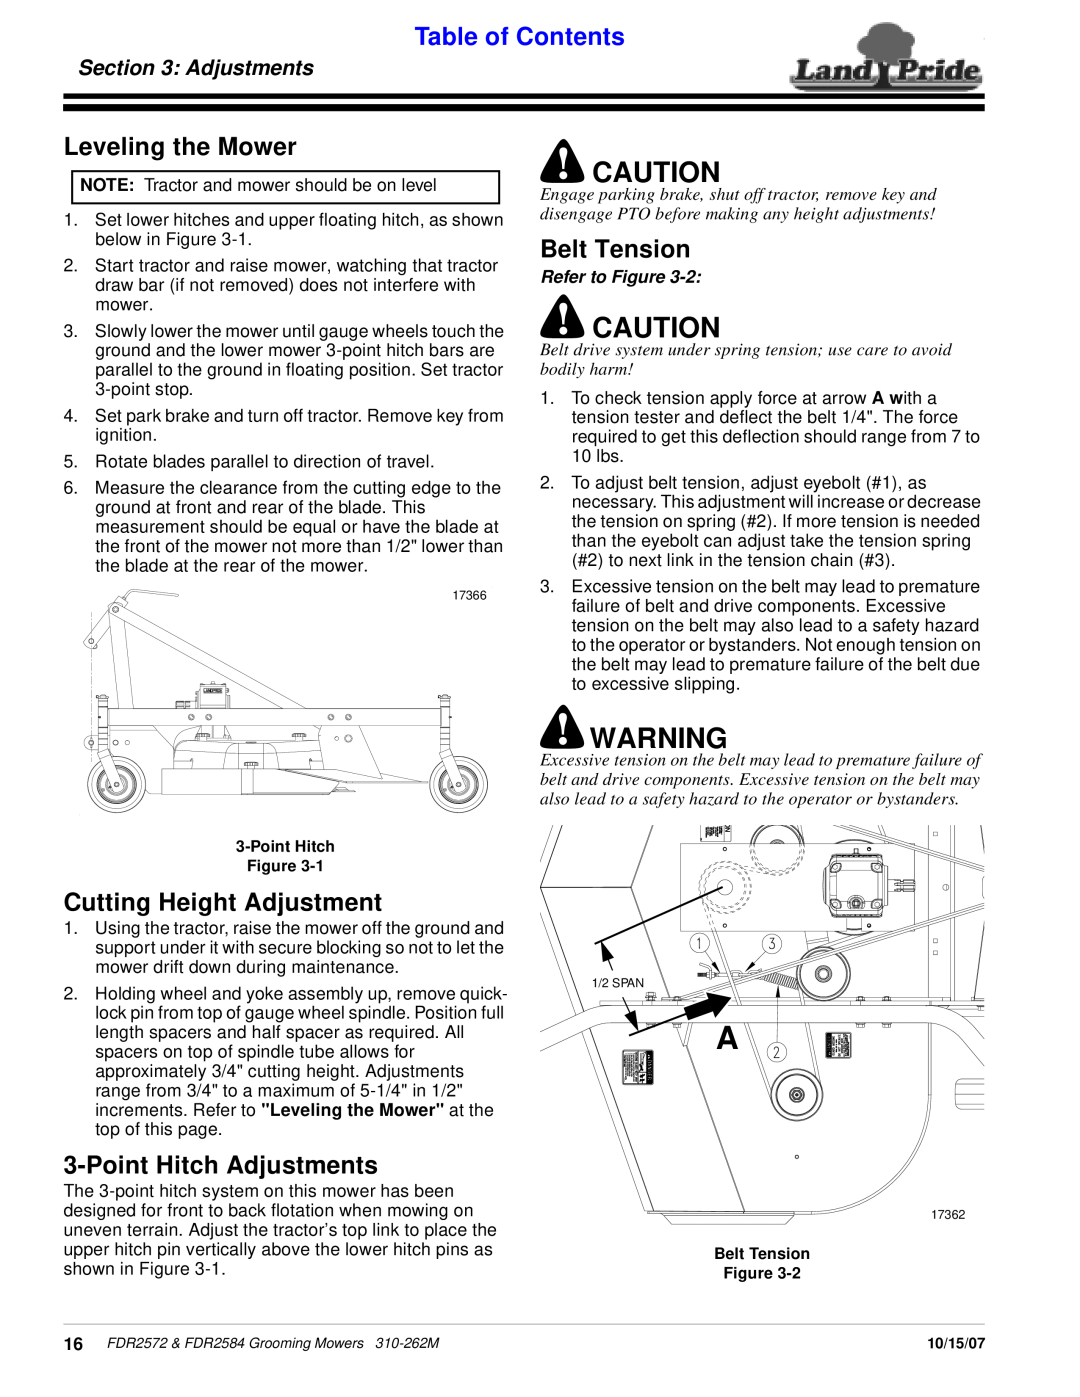 Land Pride FDR2572 Leveling the Mower, Belt Tension, Cutting Height Adjustment, PointHitch Adjustments, Table of Contents 